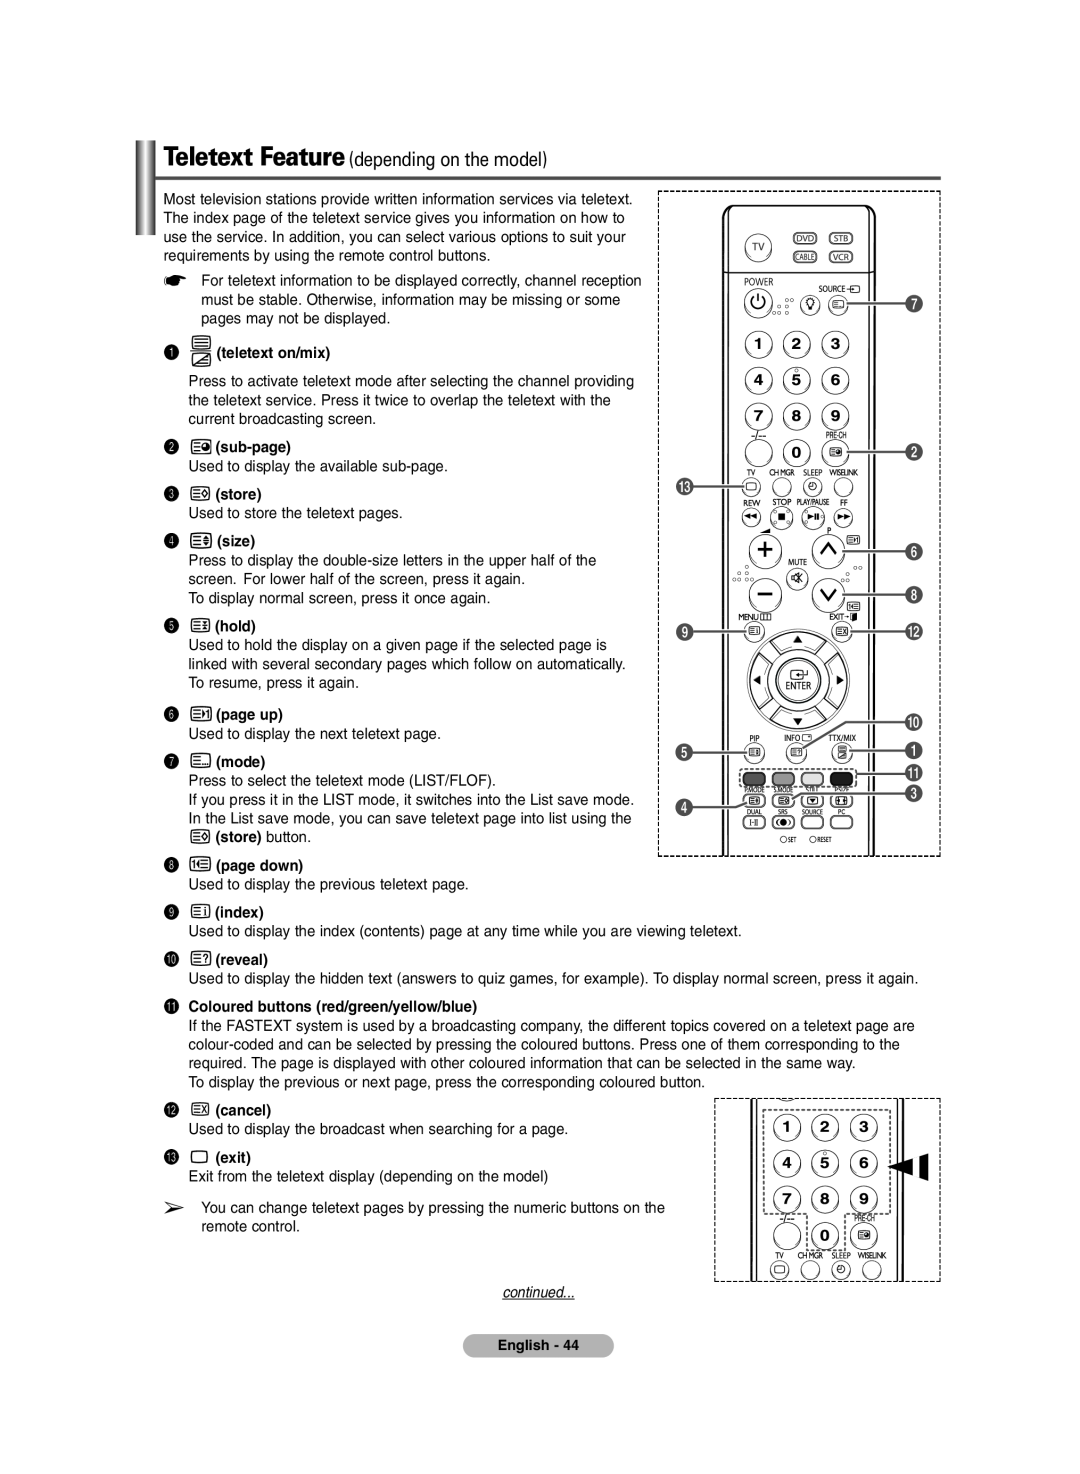 Samsung PDP-TELEVISION manual Teletext Feature depending on the model, continued 